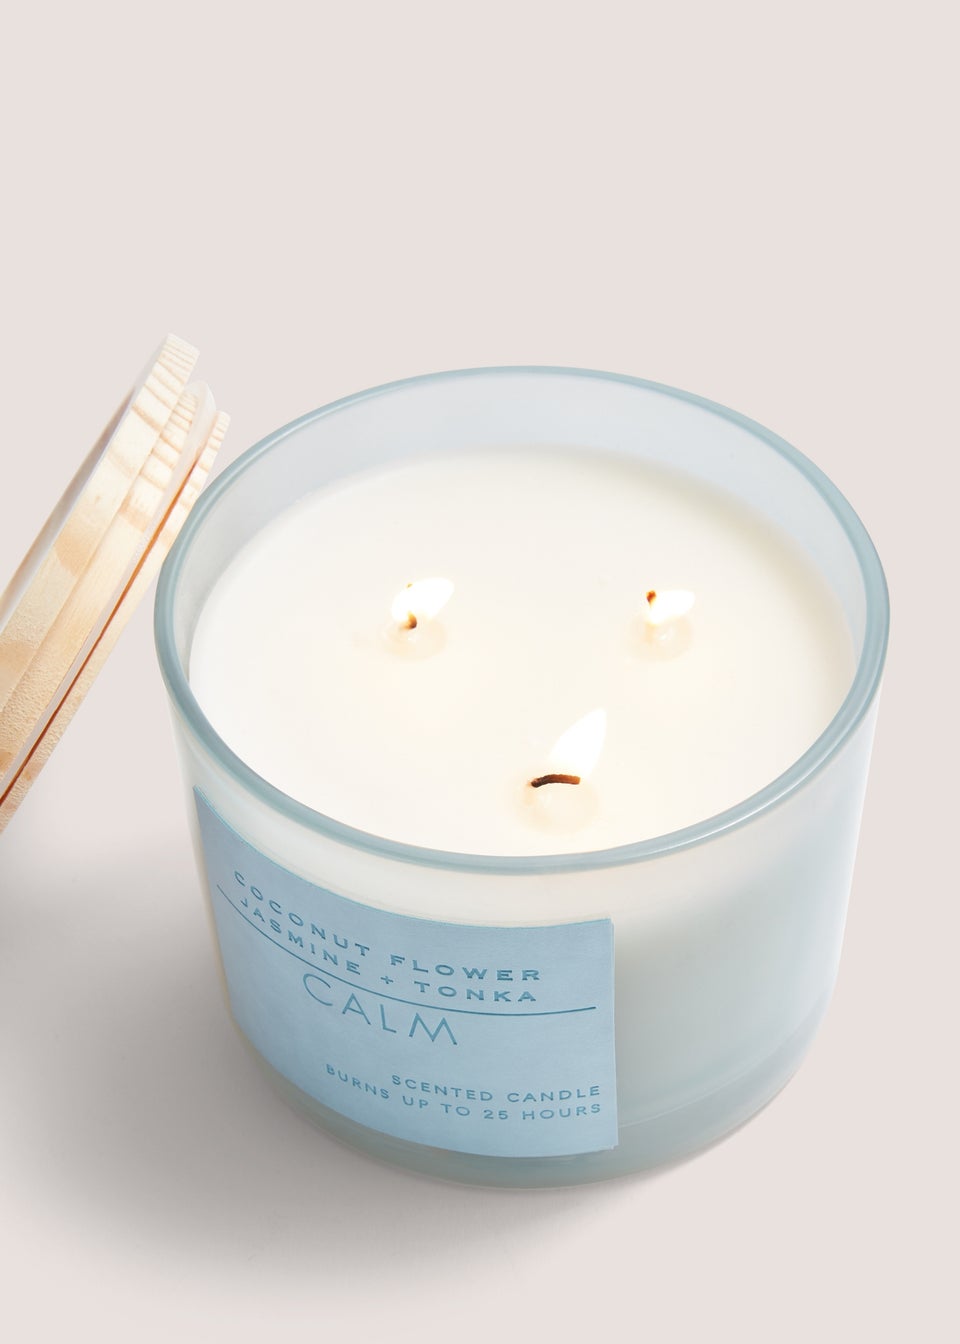 Calm Spa Scented Candle